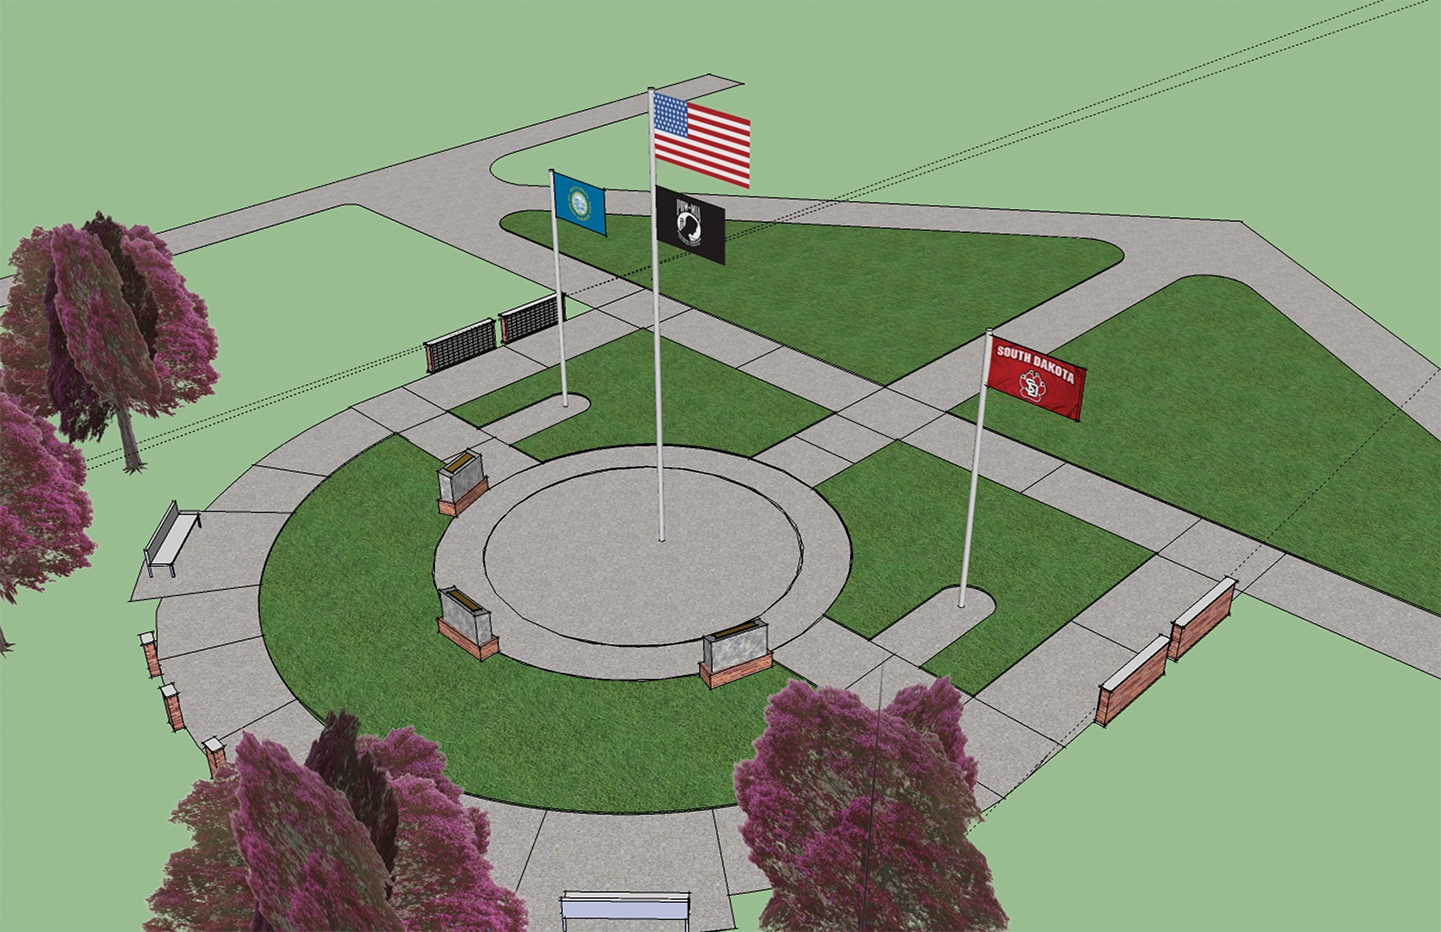 University to construct monument to honor USD’s Medal of Honor recipients